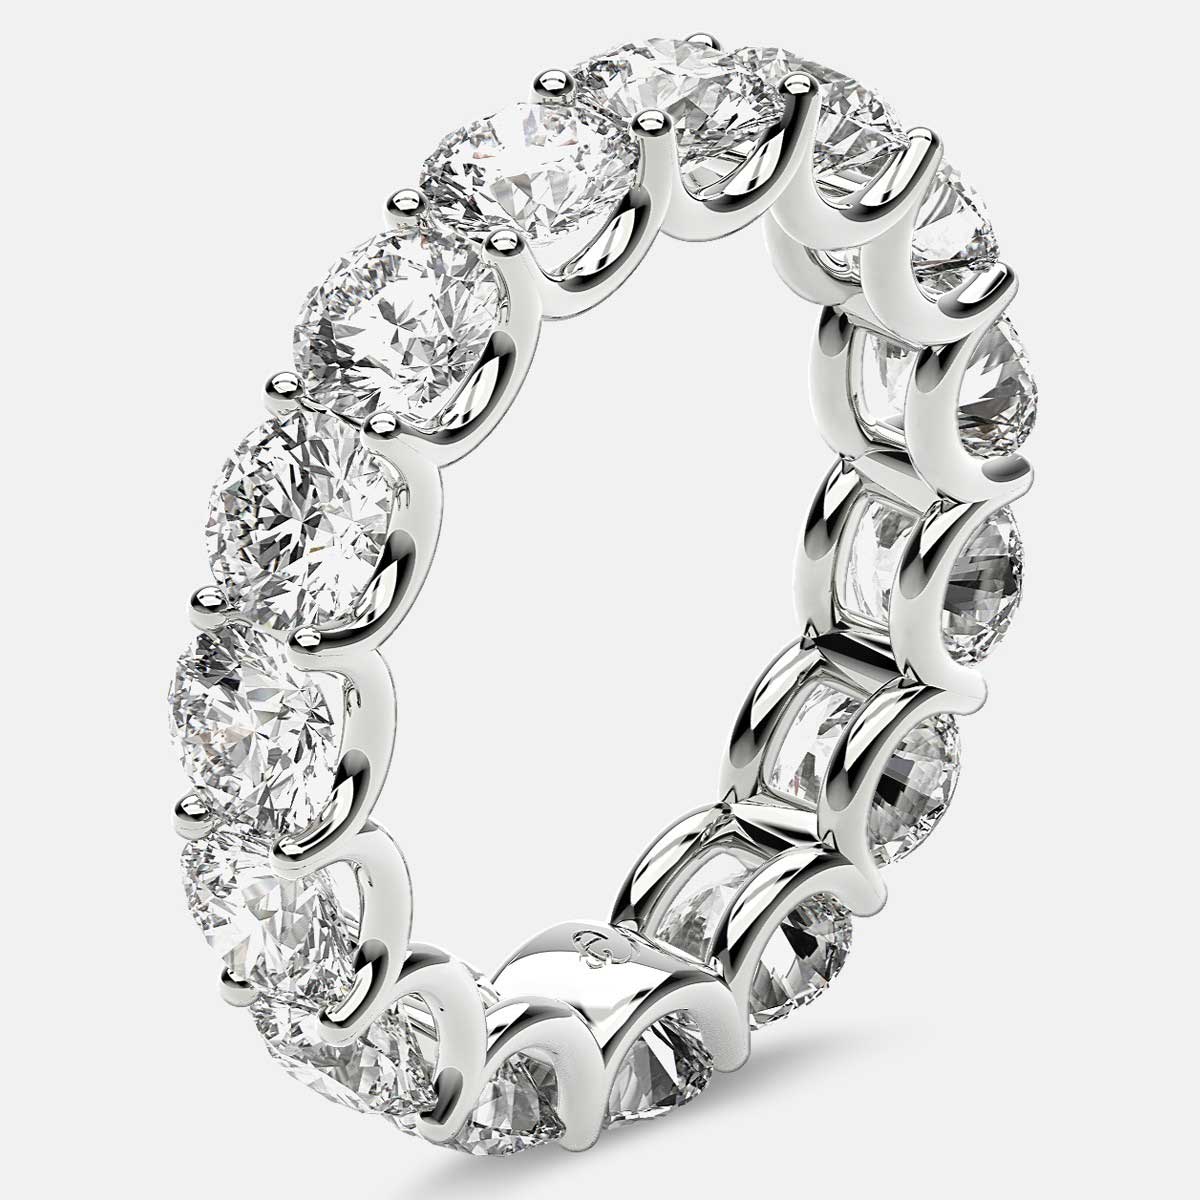 Eternity Ring with Arch Prong Set Round Diamonds in 18k White Gold